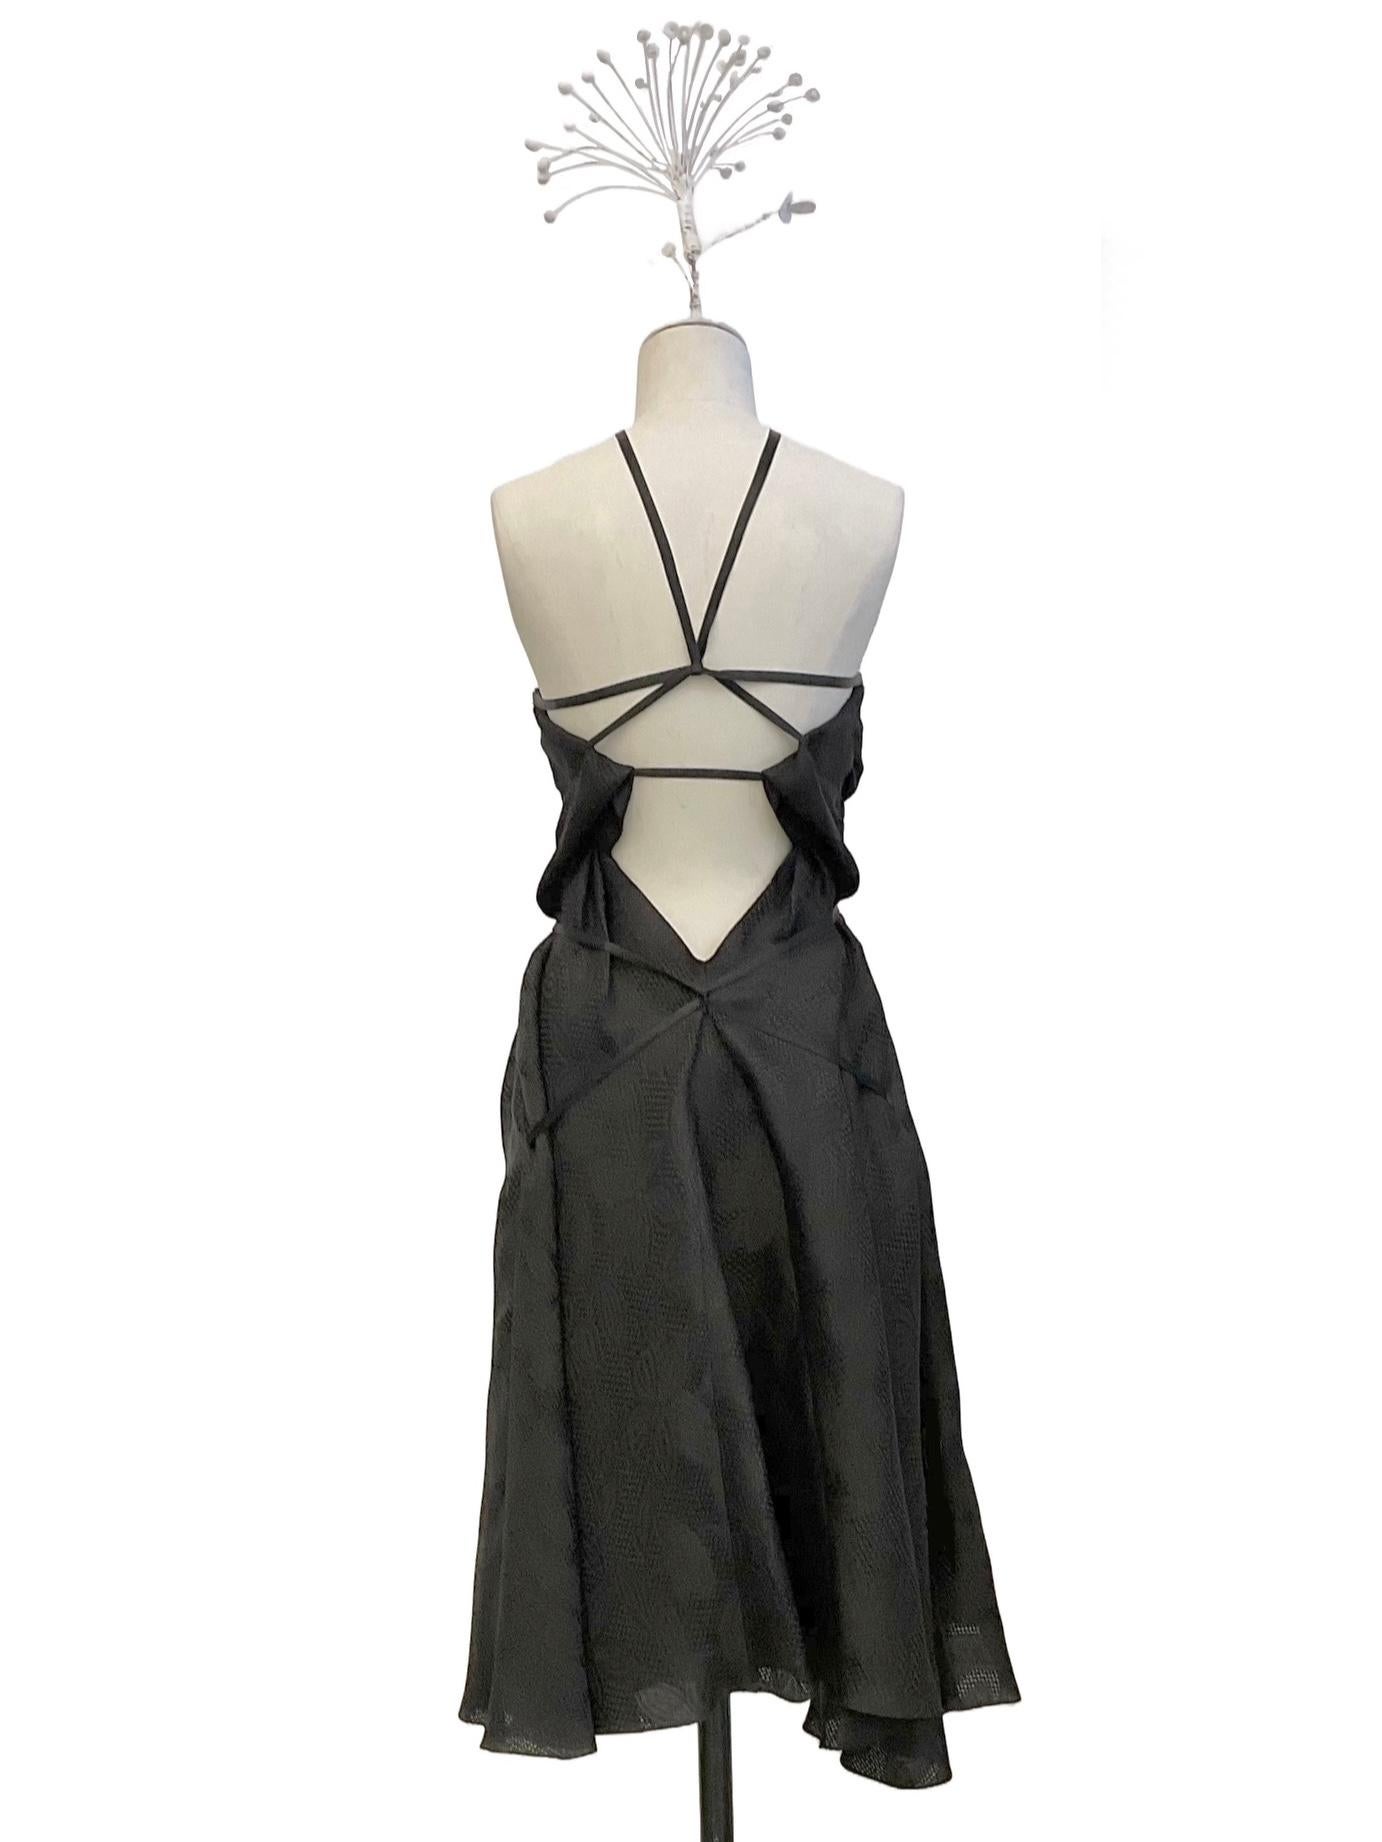 JOHN GALLIANO Black cocktail bustier dress in silk jacquard fabric SS 2008 In New Condition For Sale In Milano, IT